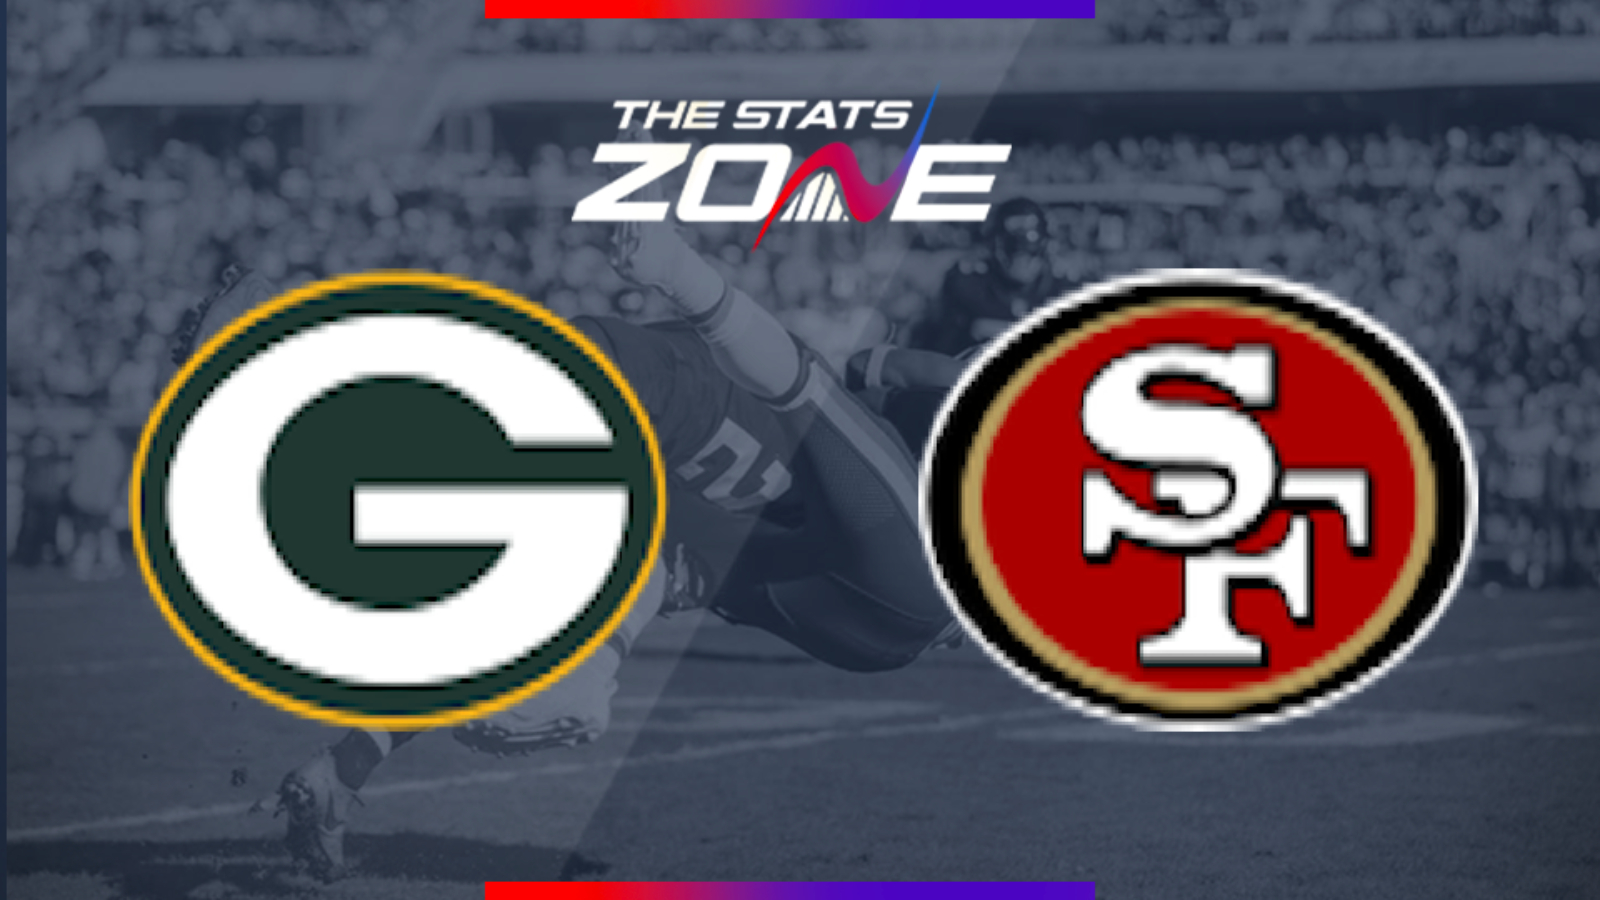 2019 NFL – Green Bay Packers @ San Francisco 49ers Preview & Pick - The Stats Zone